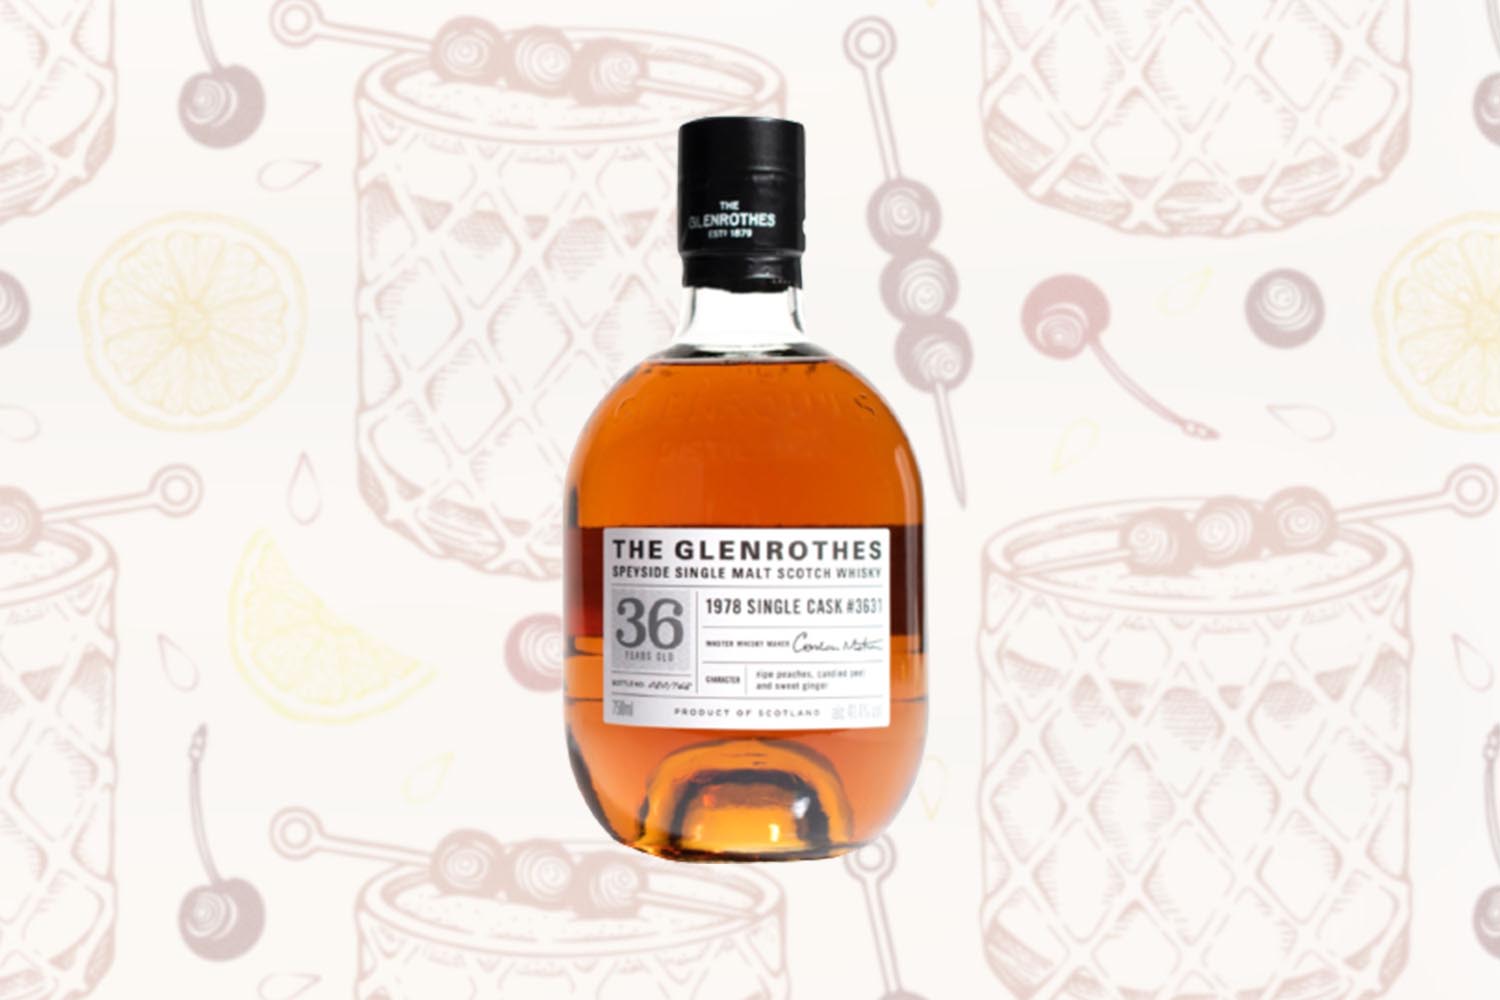 The Glenrothes 36 Year Old Single Cask Scotch